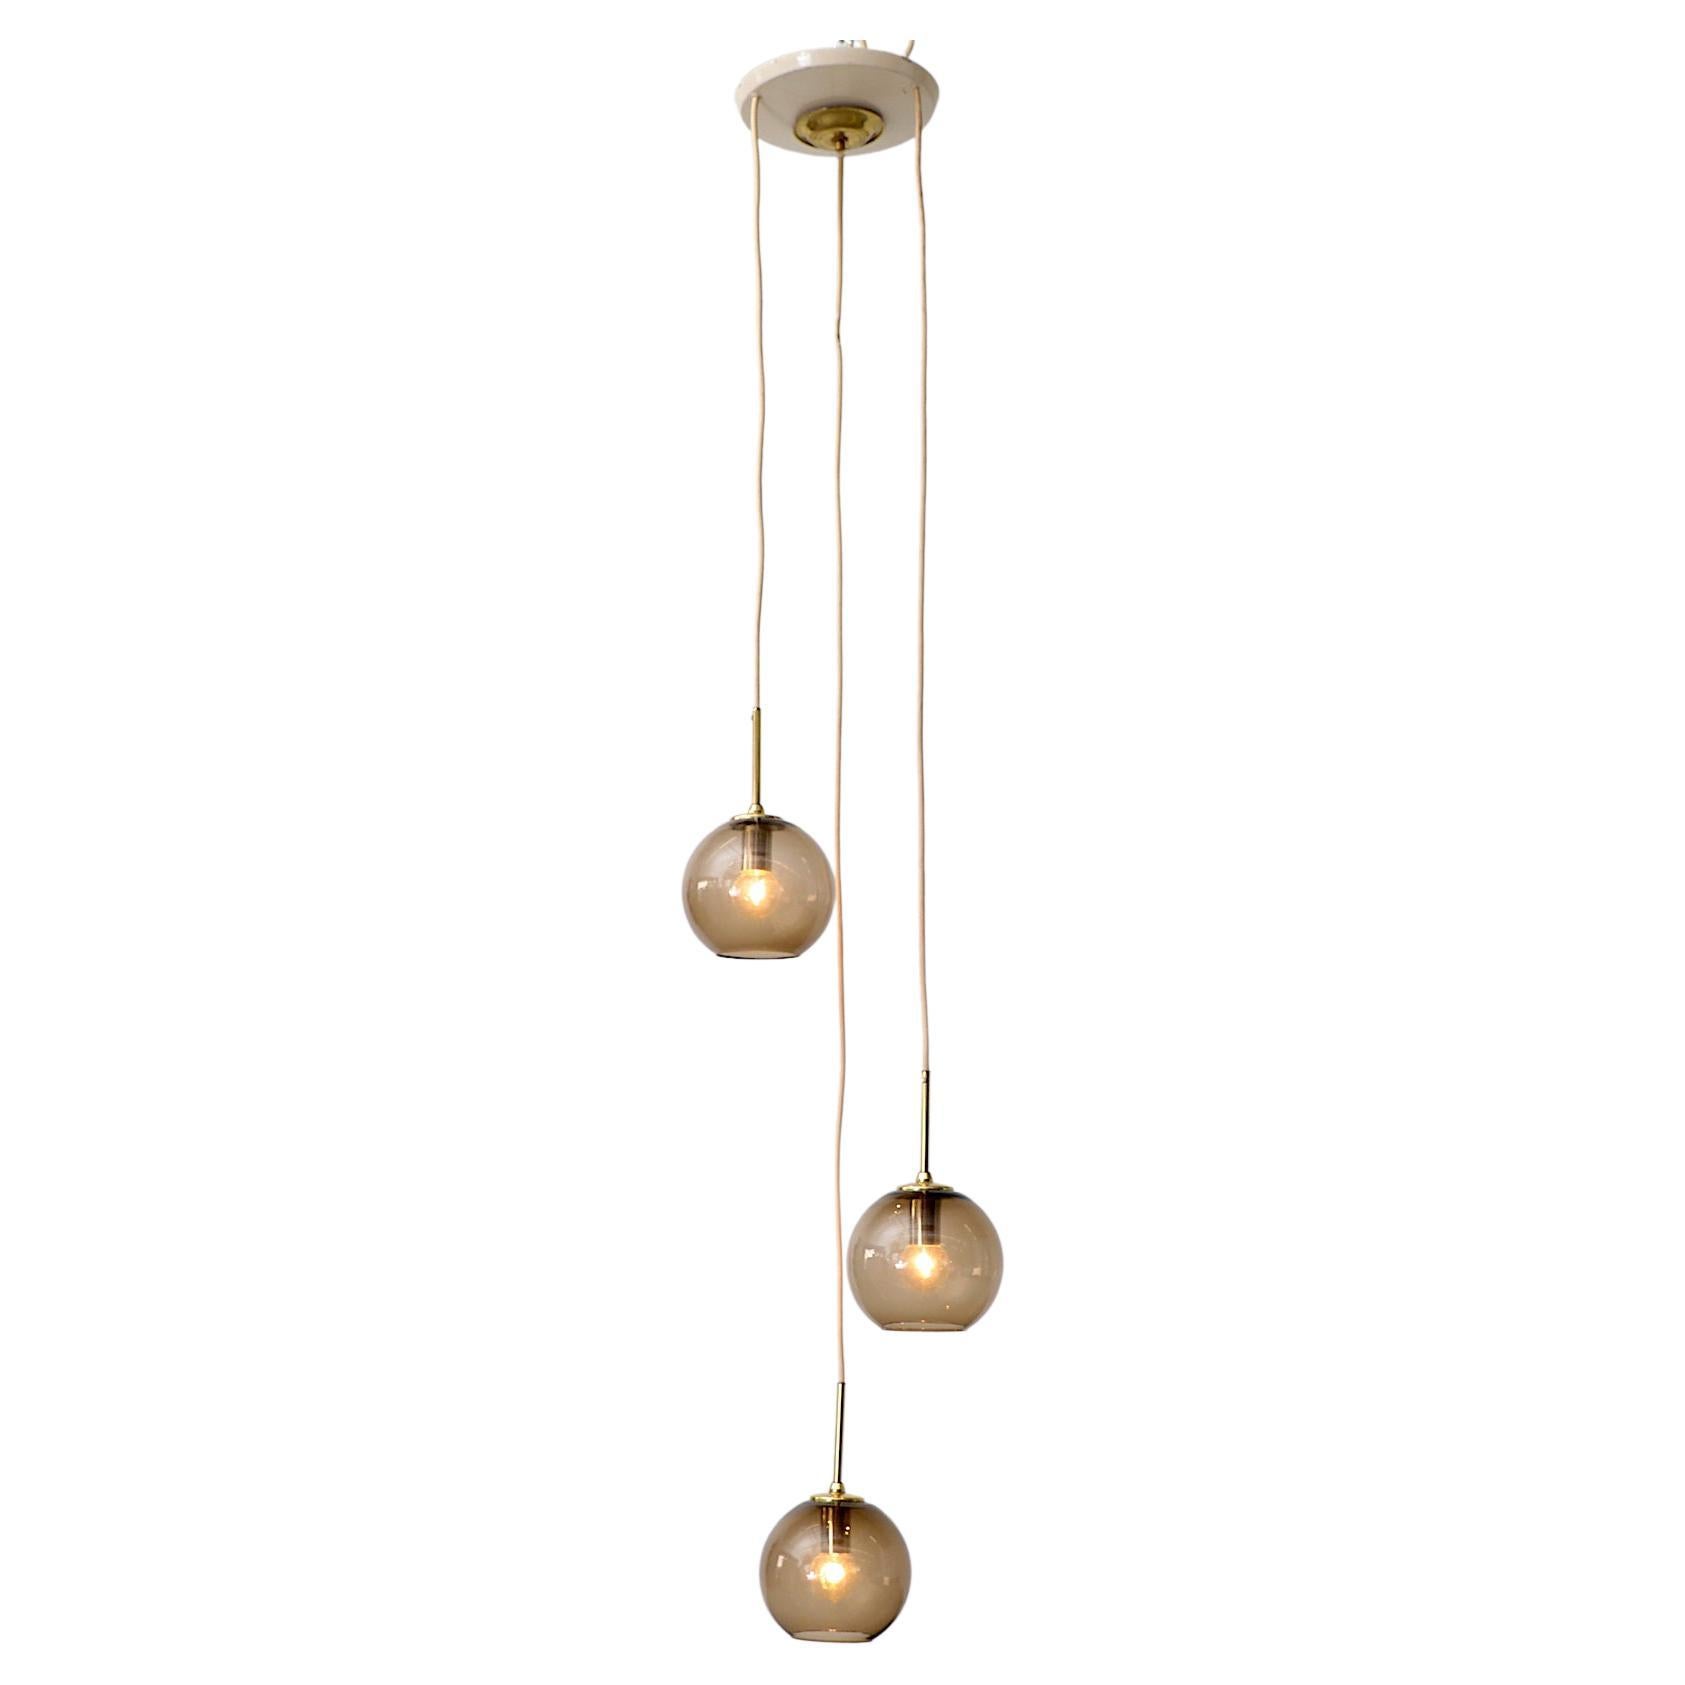 1970s Chandelier with 3 Smoked Glass Globes